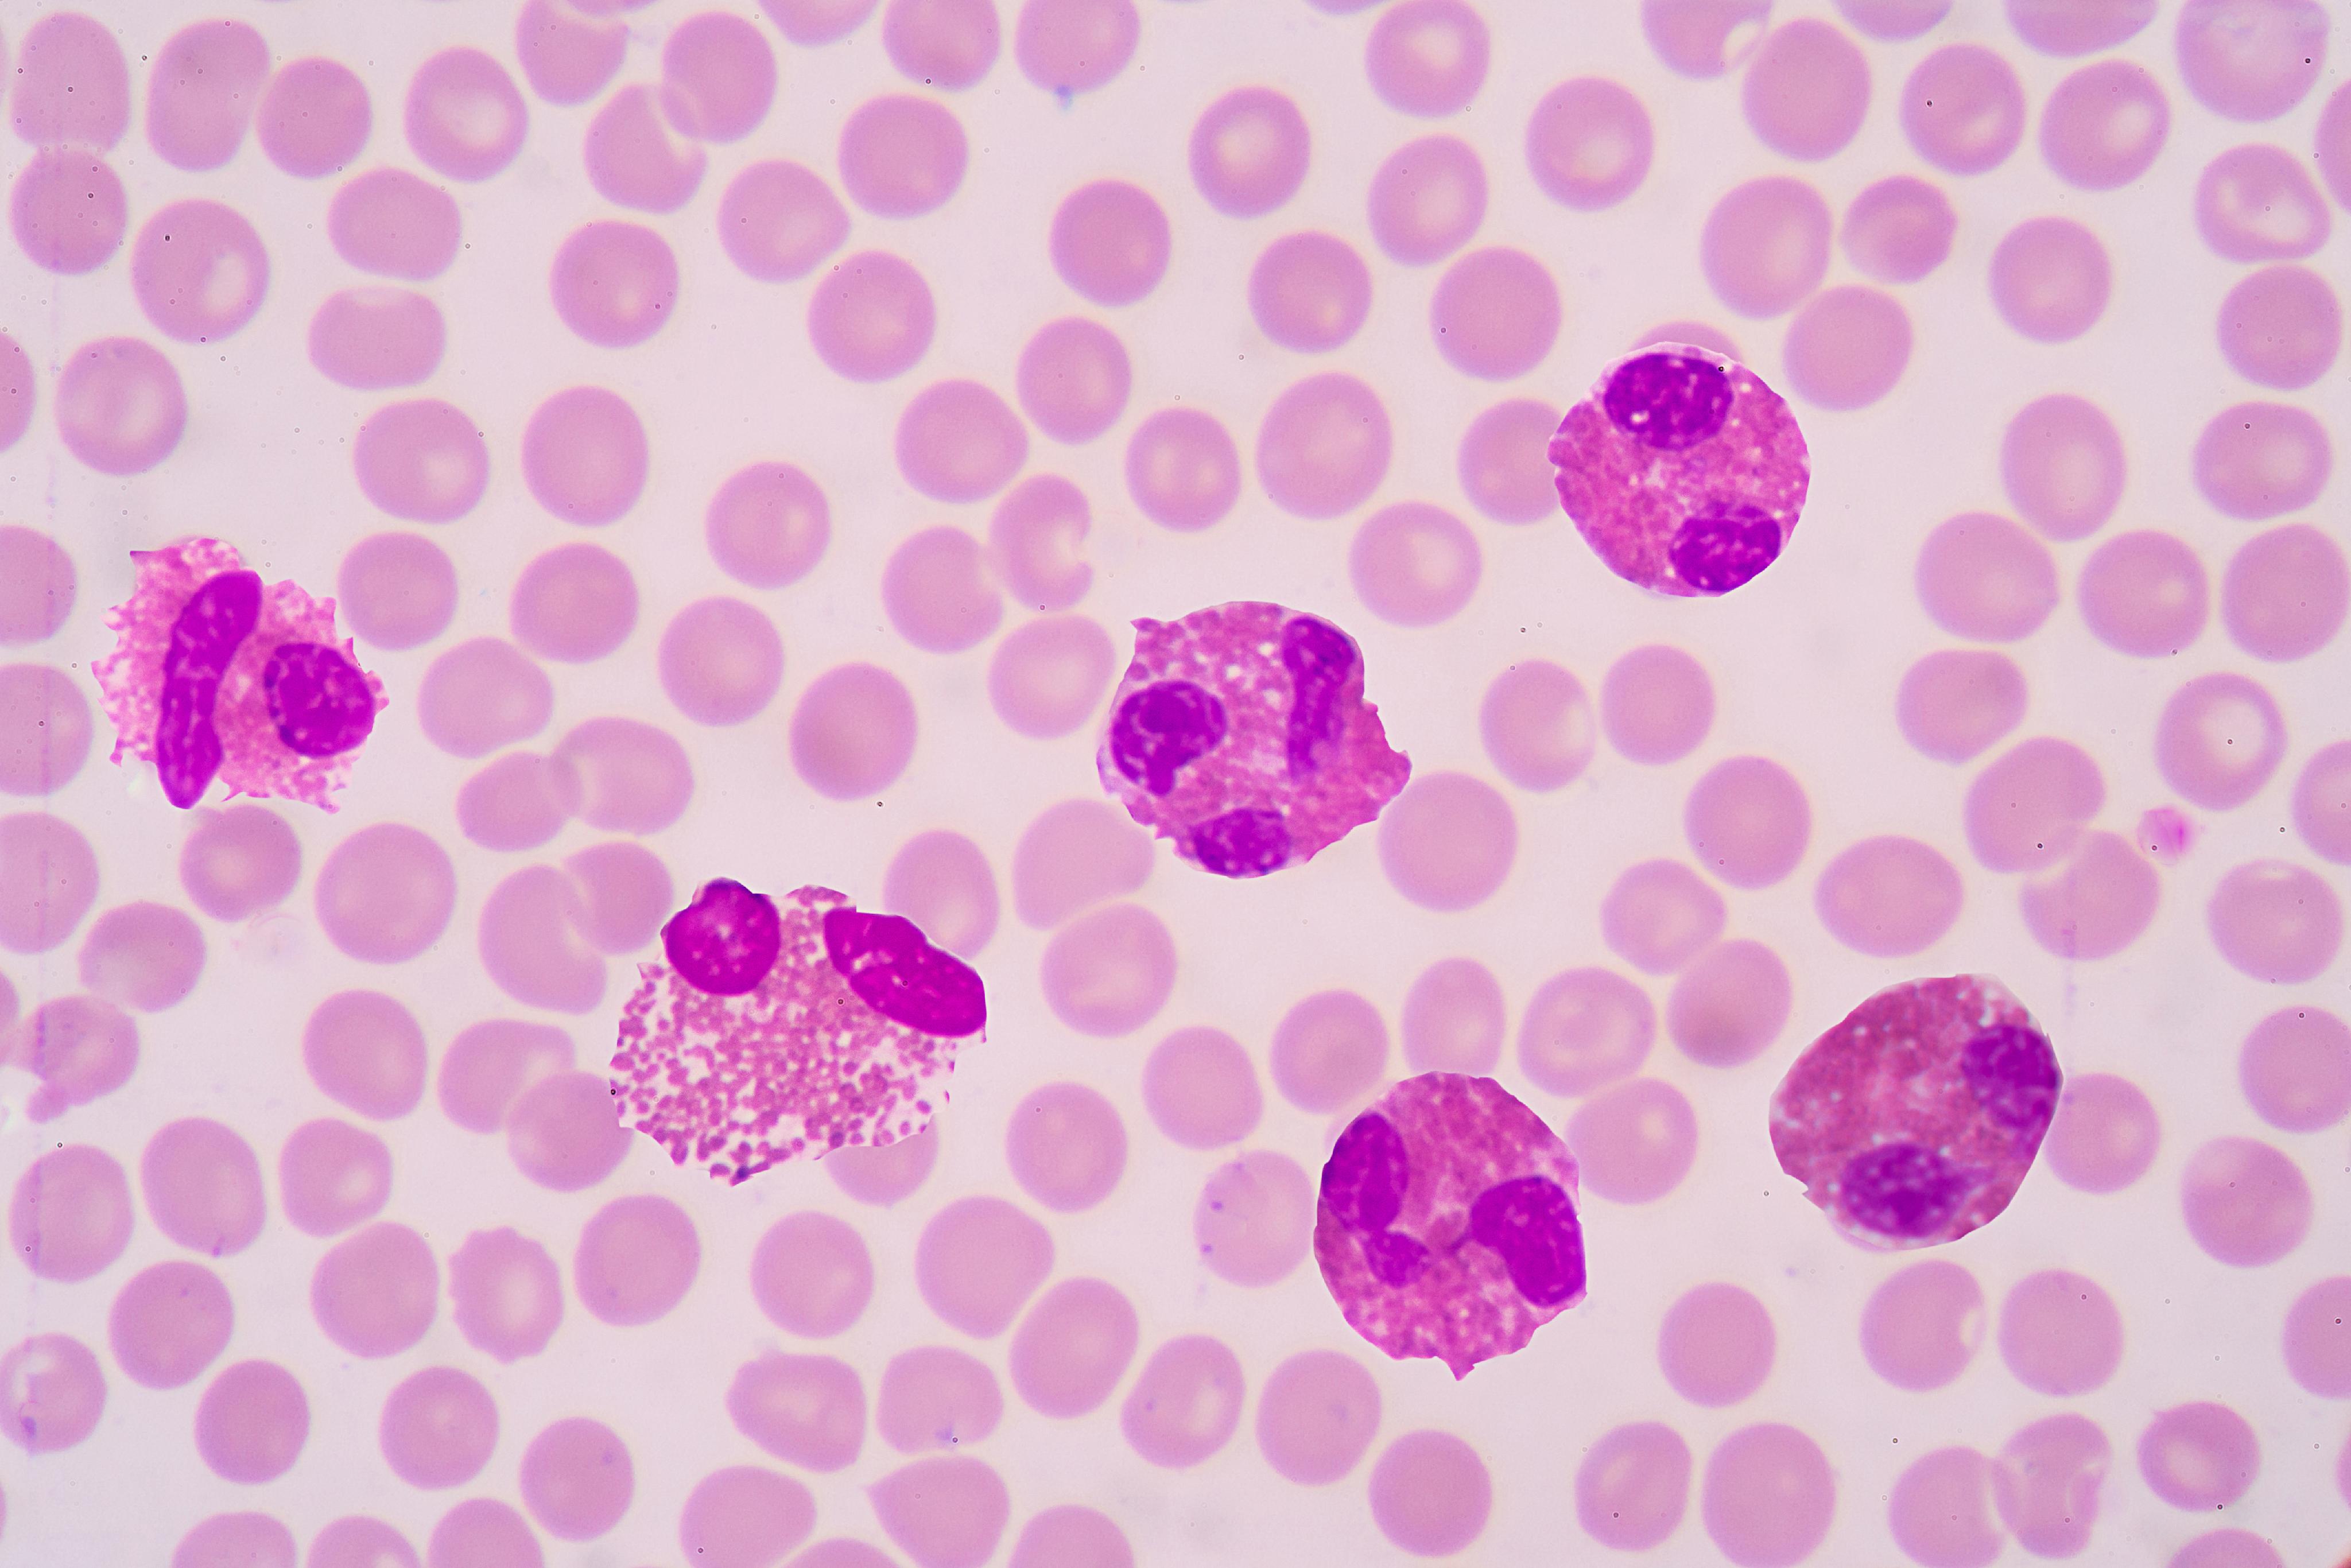 eosinophils-count-high-causes-doctorvisit